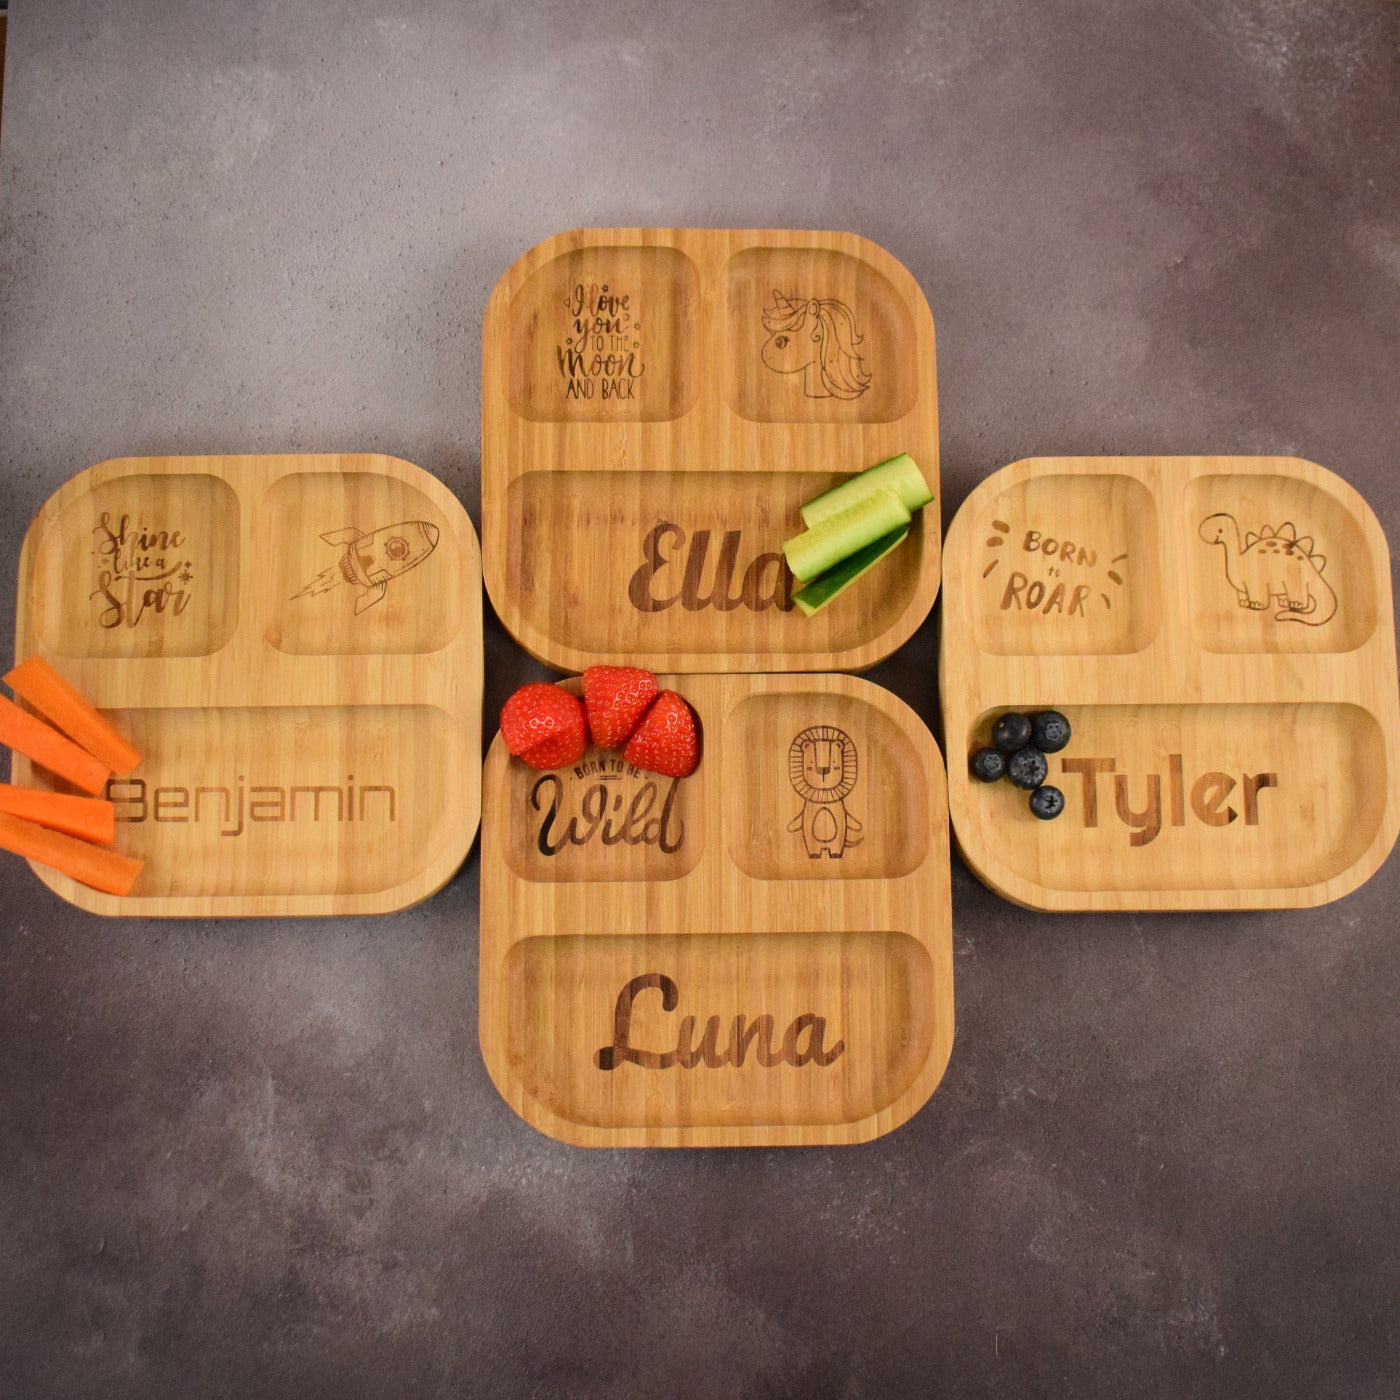 Personalised Engraved Bamboo Children's Plate - Weaning - Baby Gift - Toddler Gifts- 4 Section Square Bamboo Plate with Suction